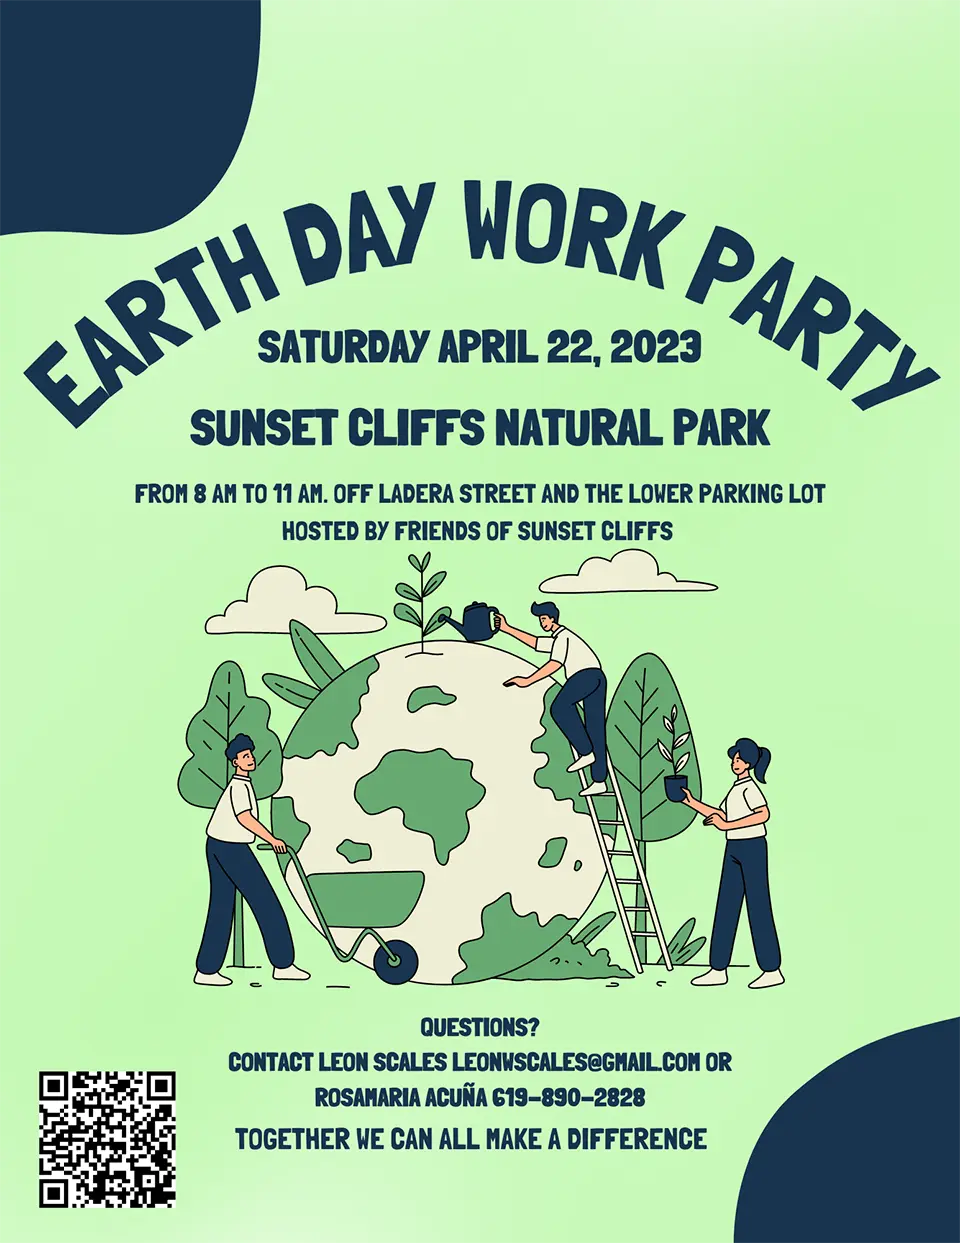 Sunset cliffs natural park earth day work party